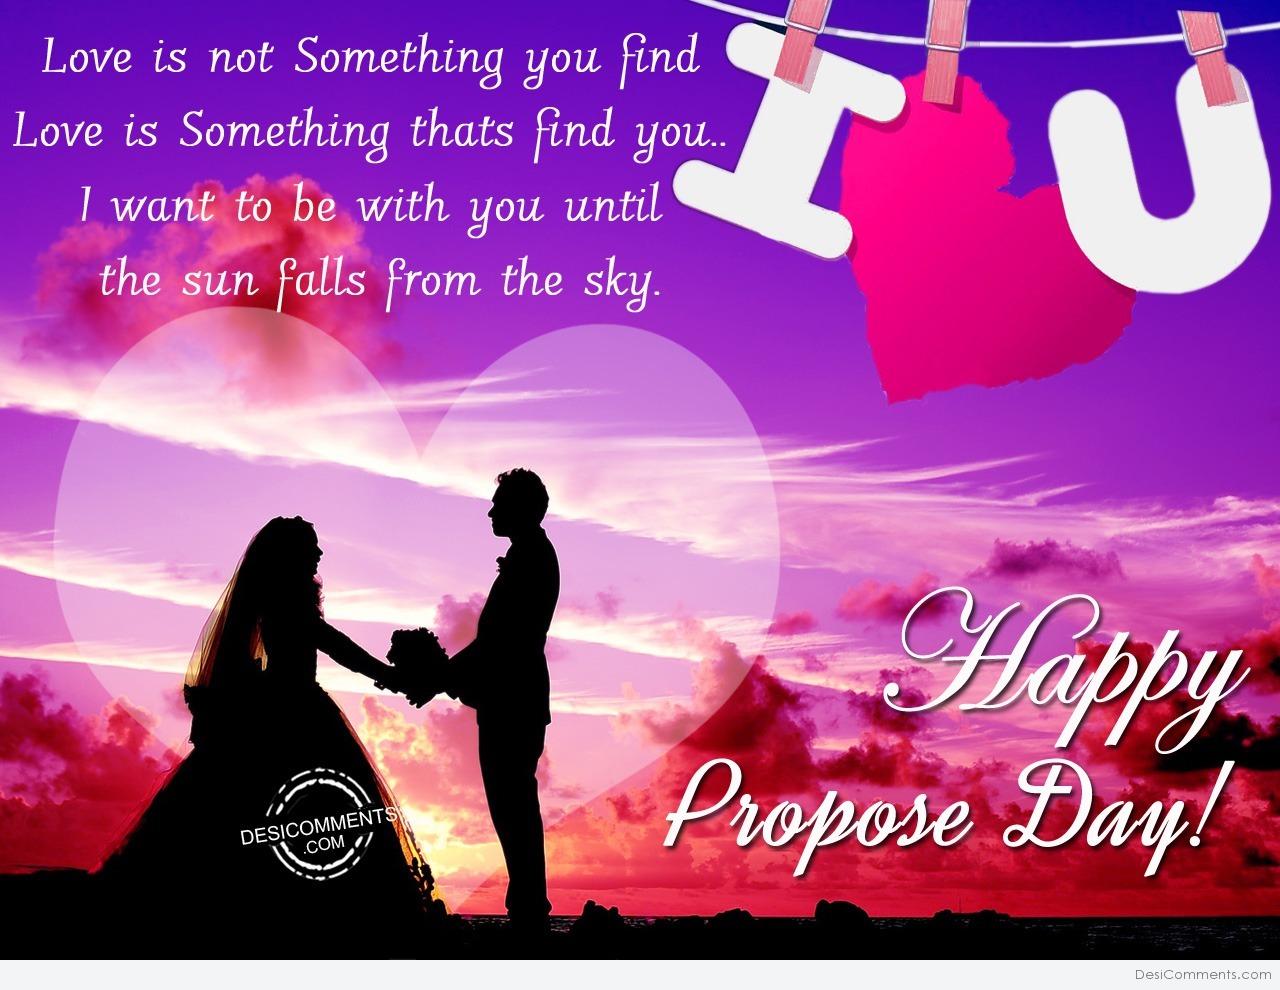 Love is not something, Happy Propose Day 